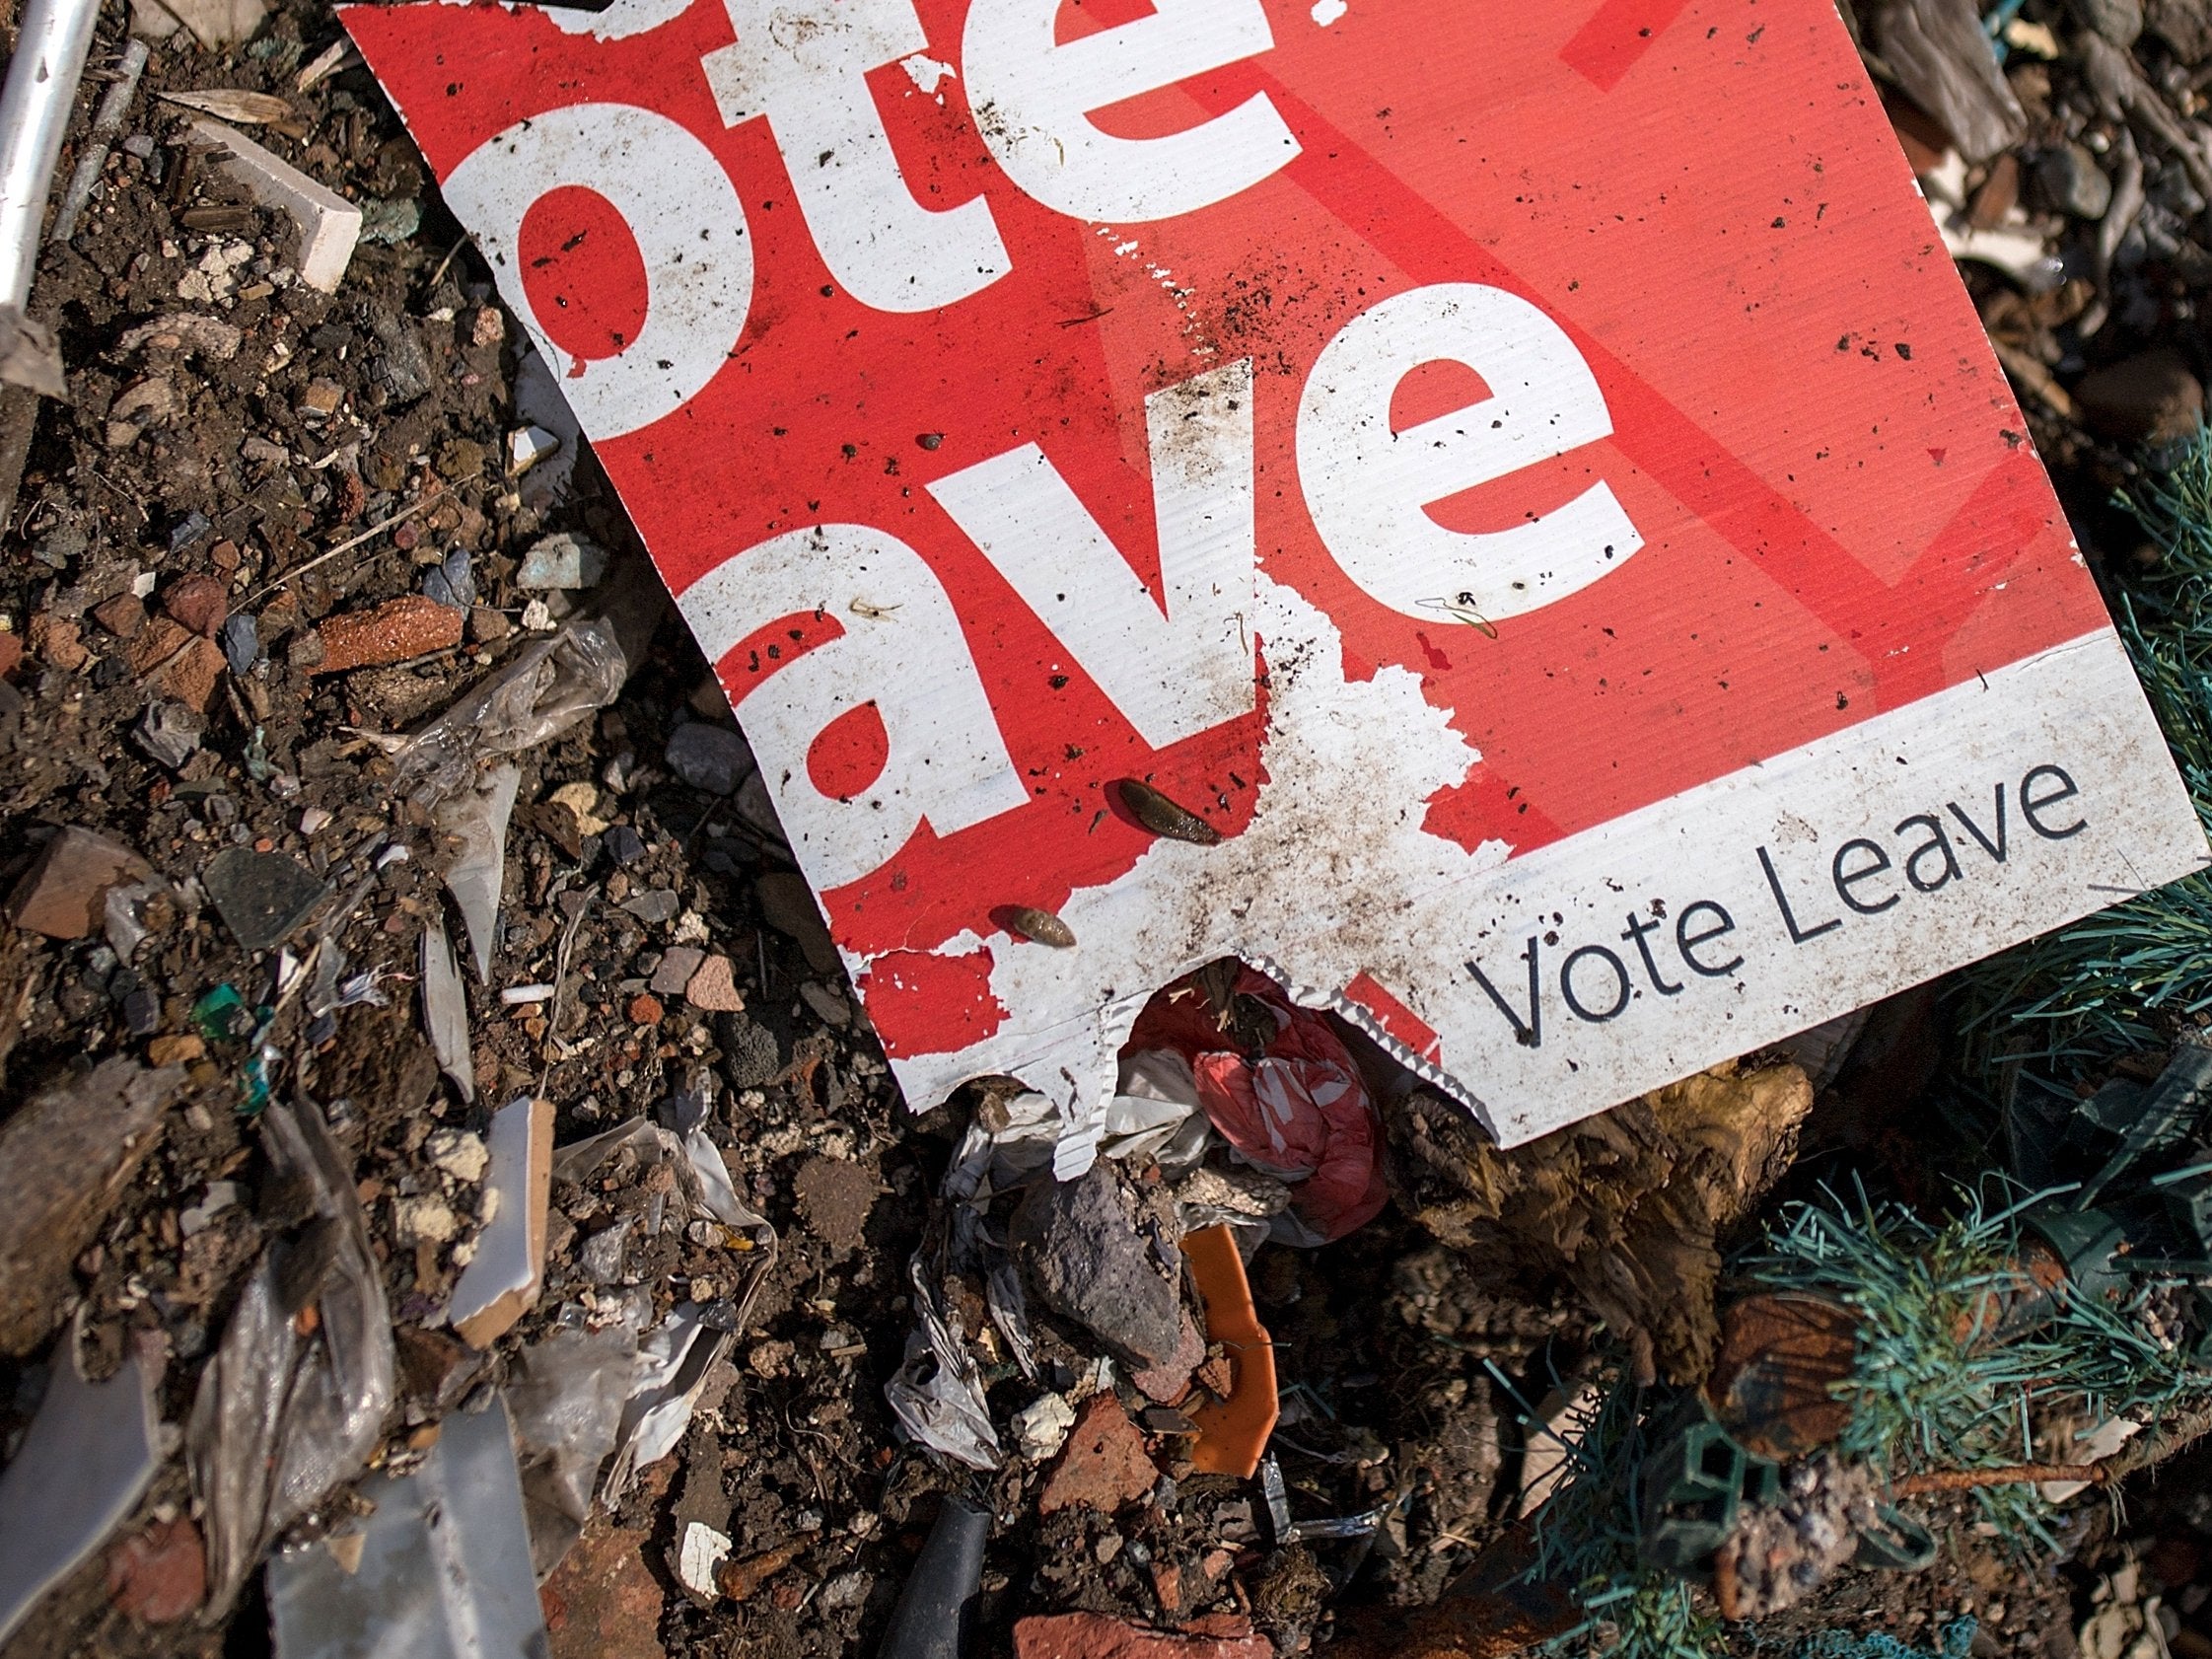 Vote Leave was referred to the police last year for breaching campaign spending limits